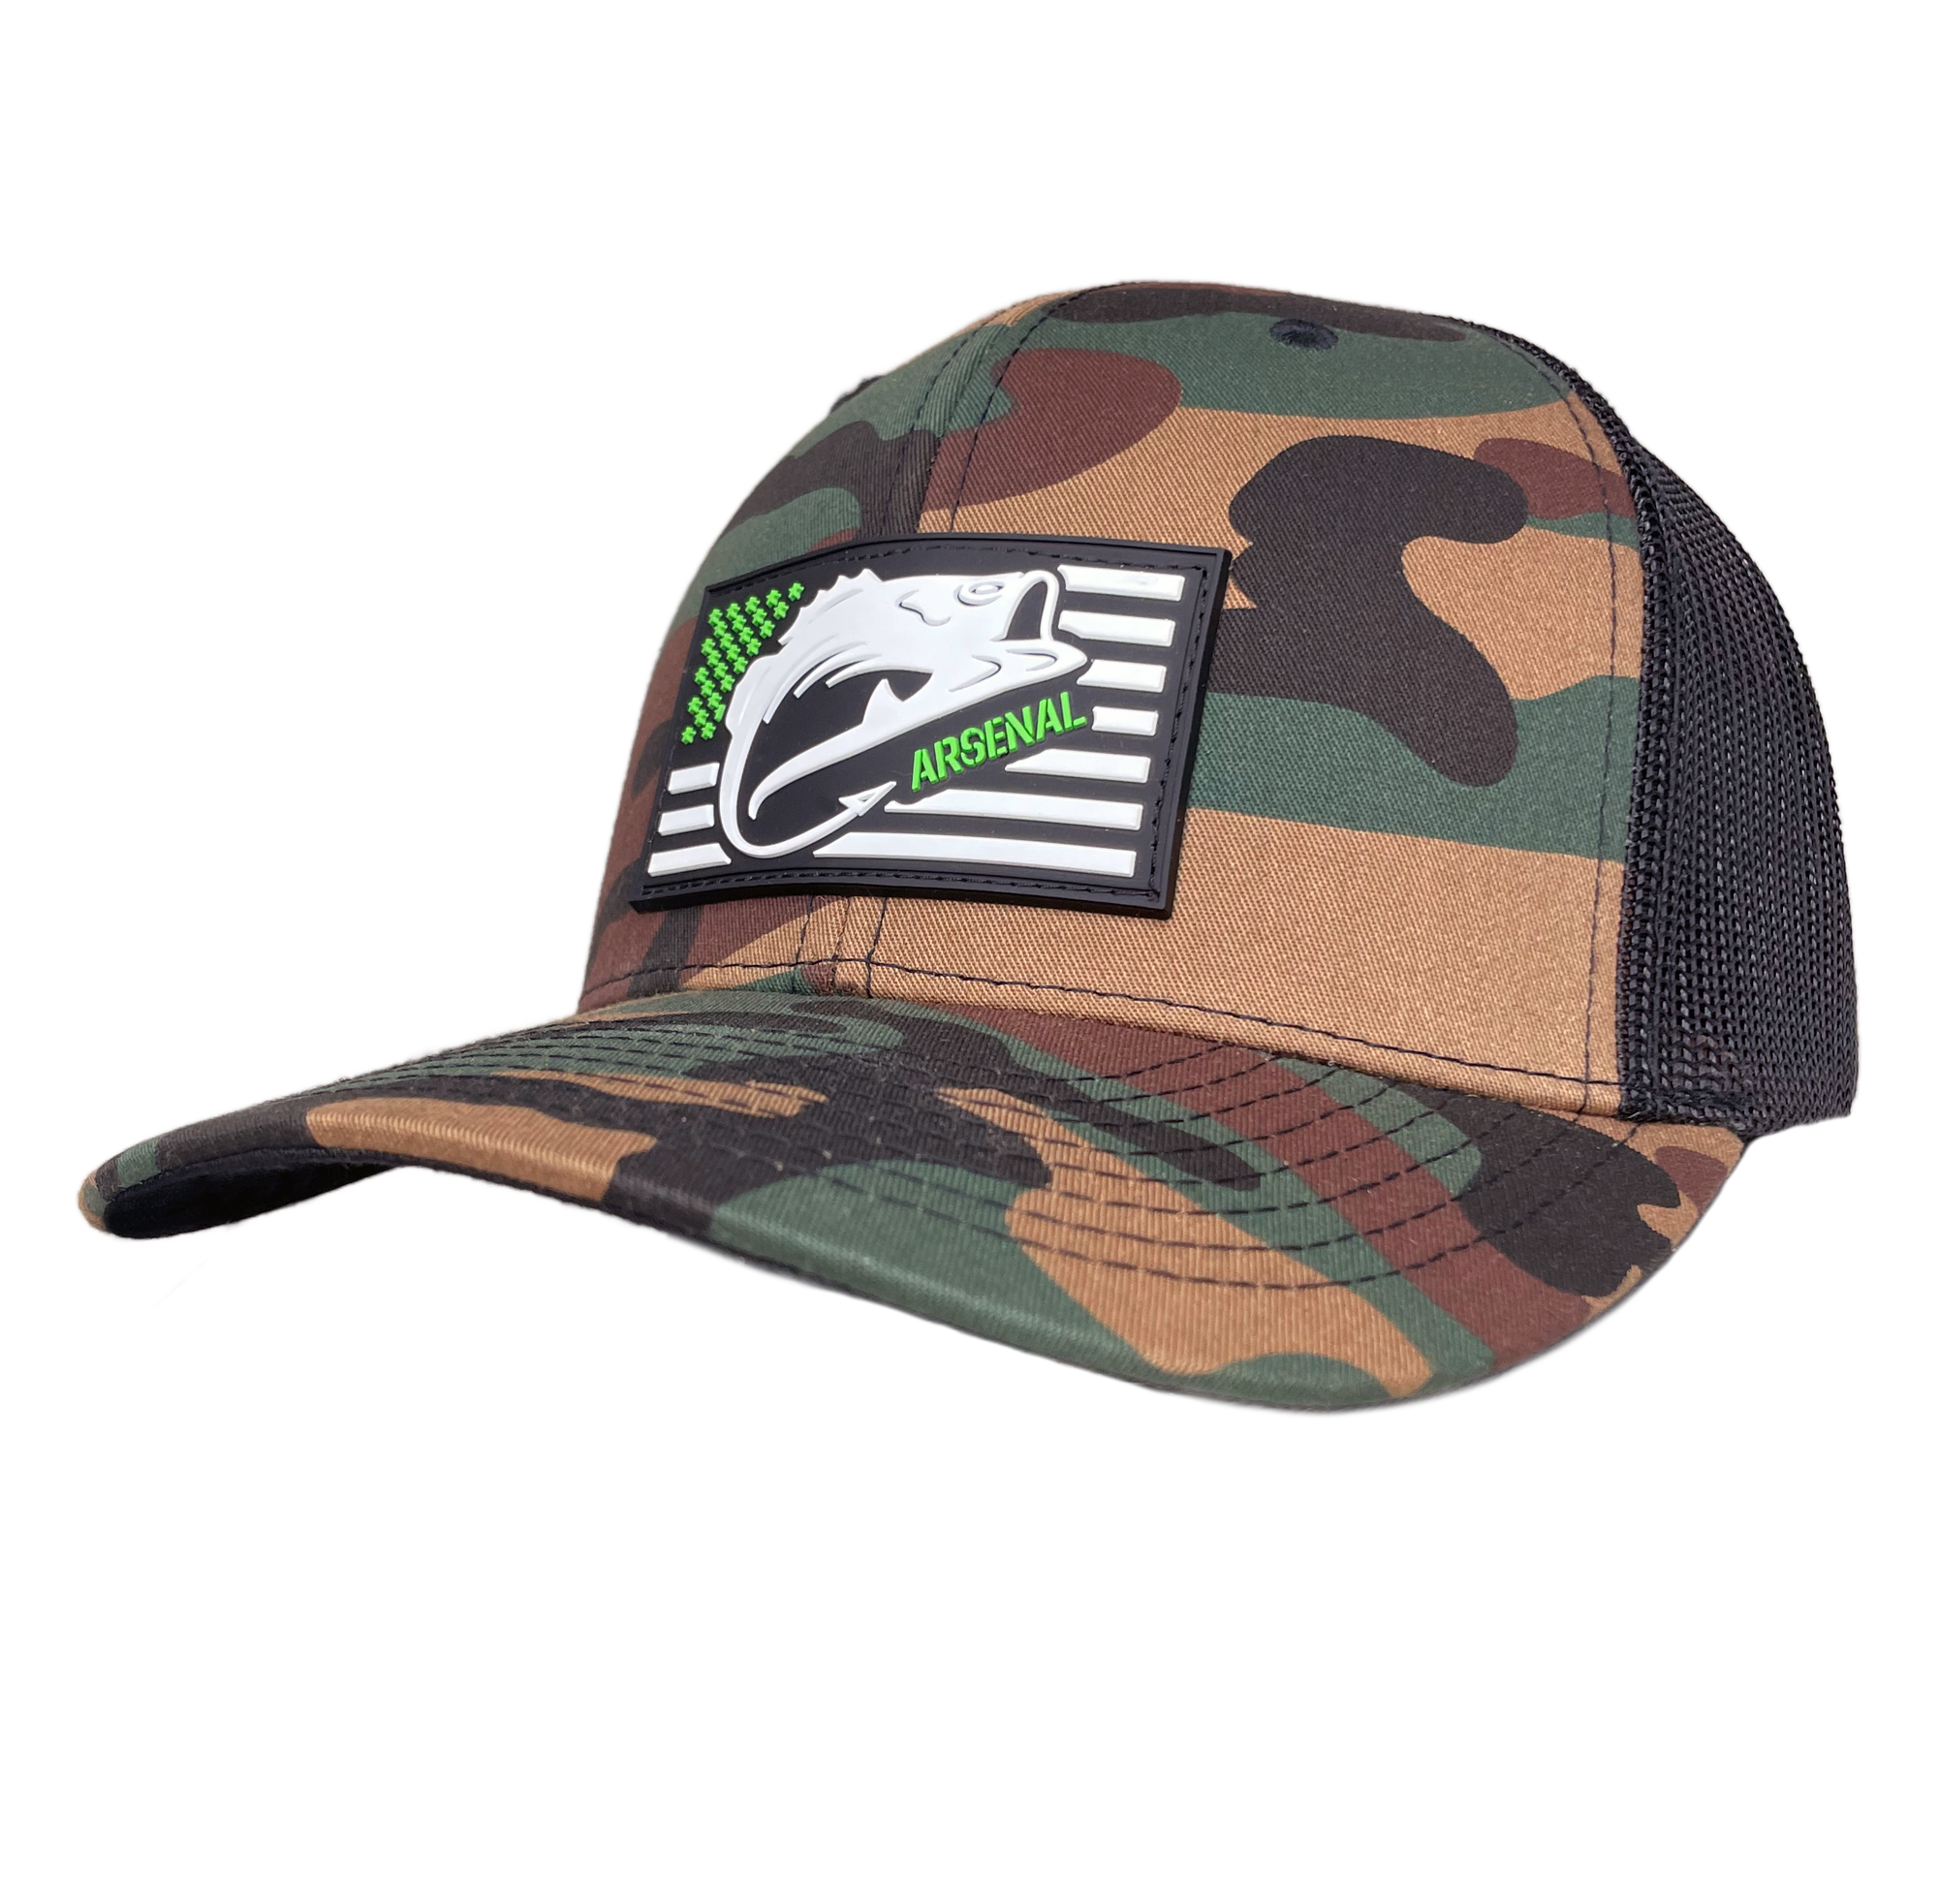 Woodland Camo Flag Trucker Hat – Arsenal Fishing - Home of the